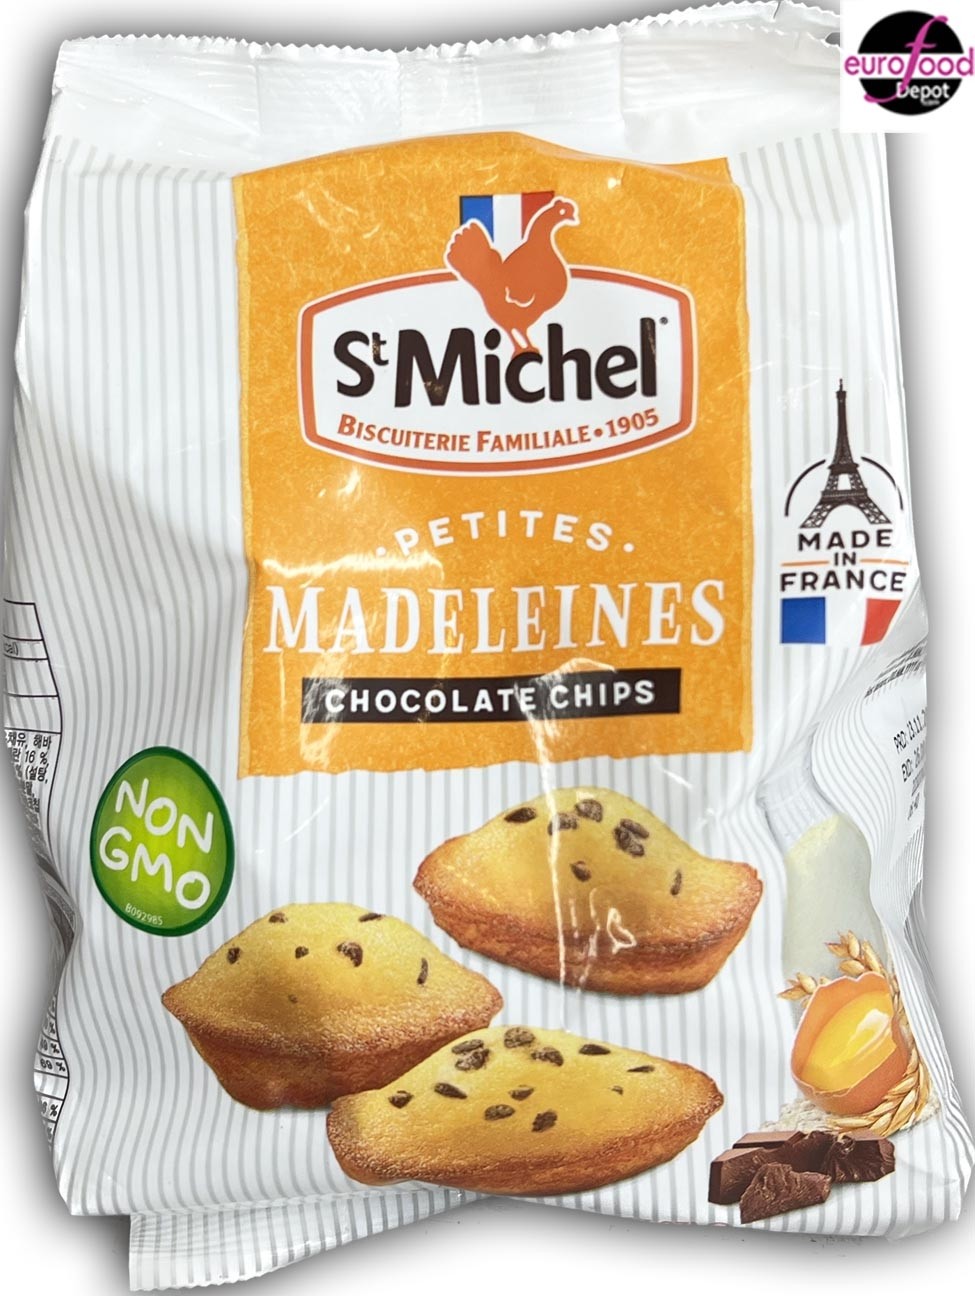 St Michel French Mini Madeleines with Chocolate chips 